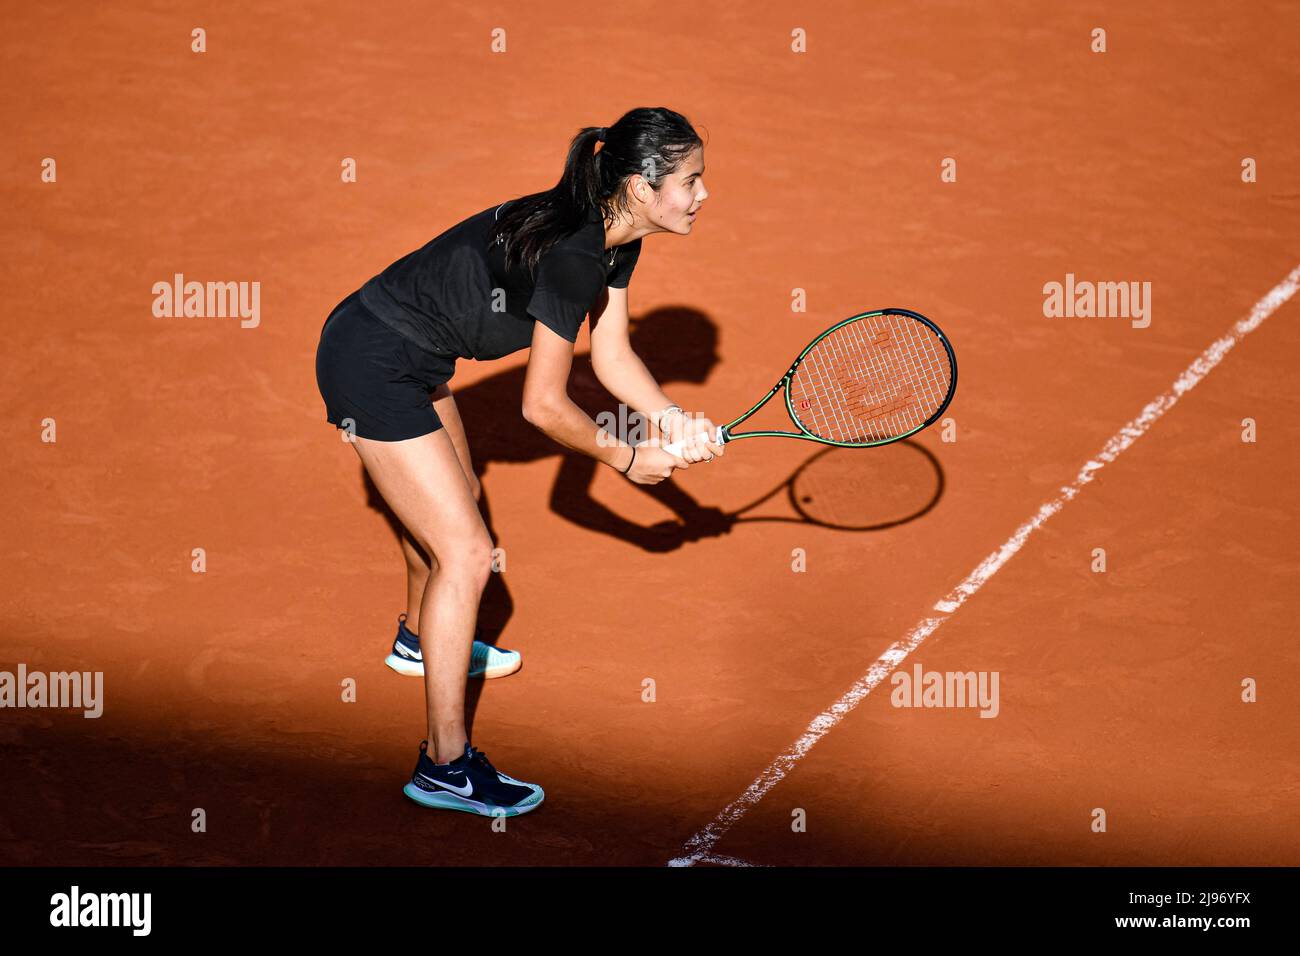 Emma Raducanu of Great Britain during the French Open (Roland-Garros) 2022, Grand Slam tennis tournament on May 19, 2022 at Roland-Garros stadium in Paris, France